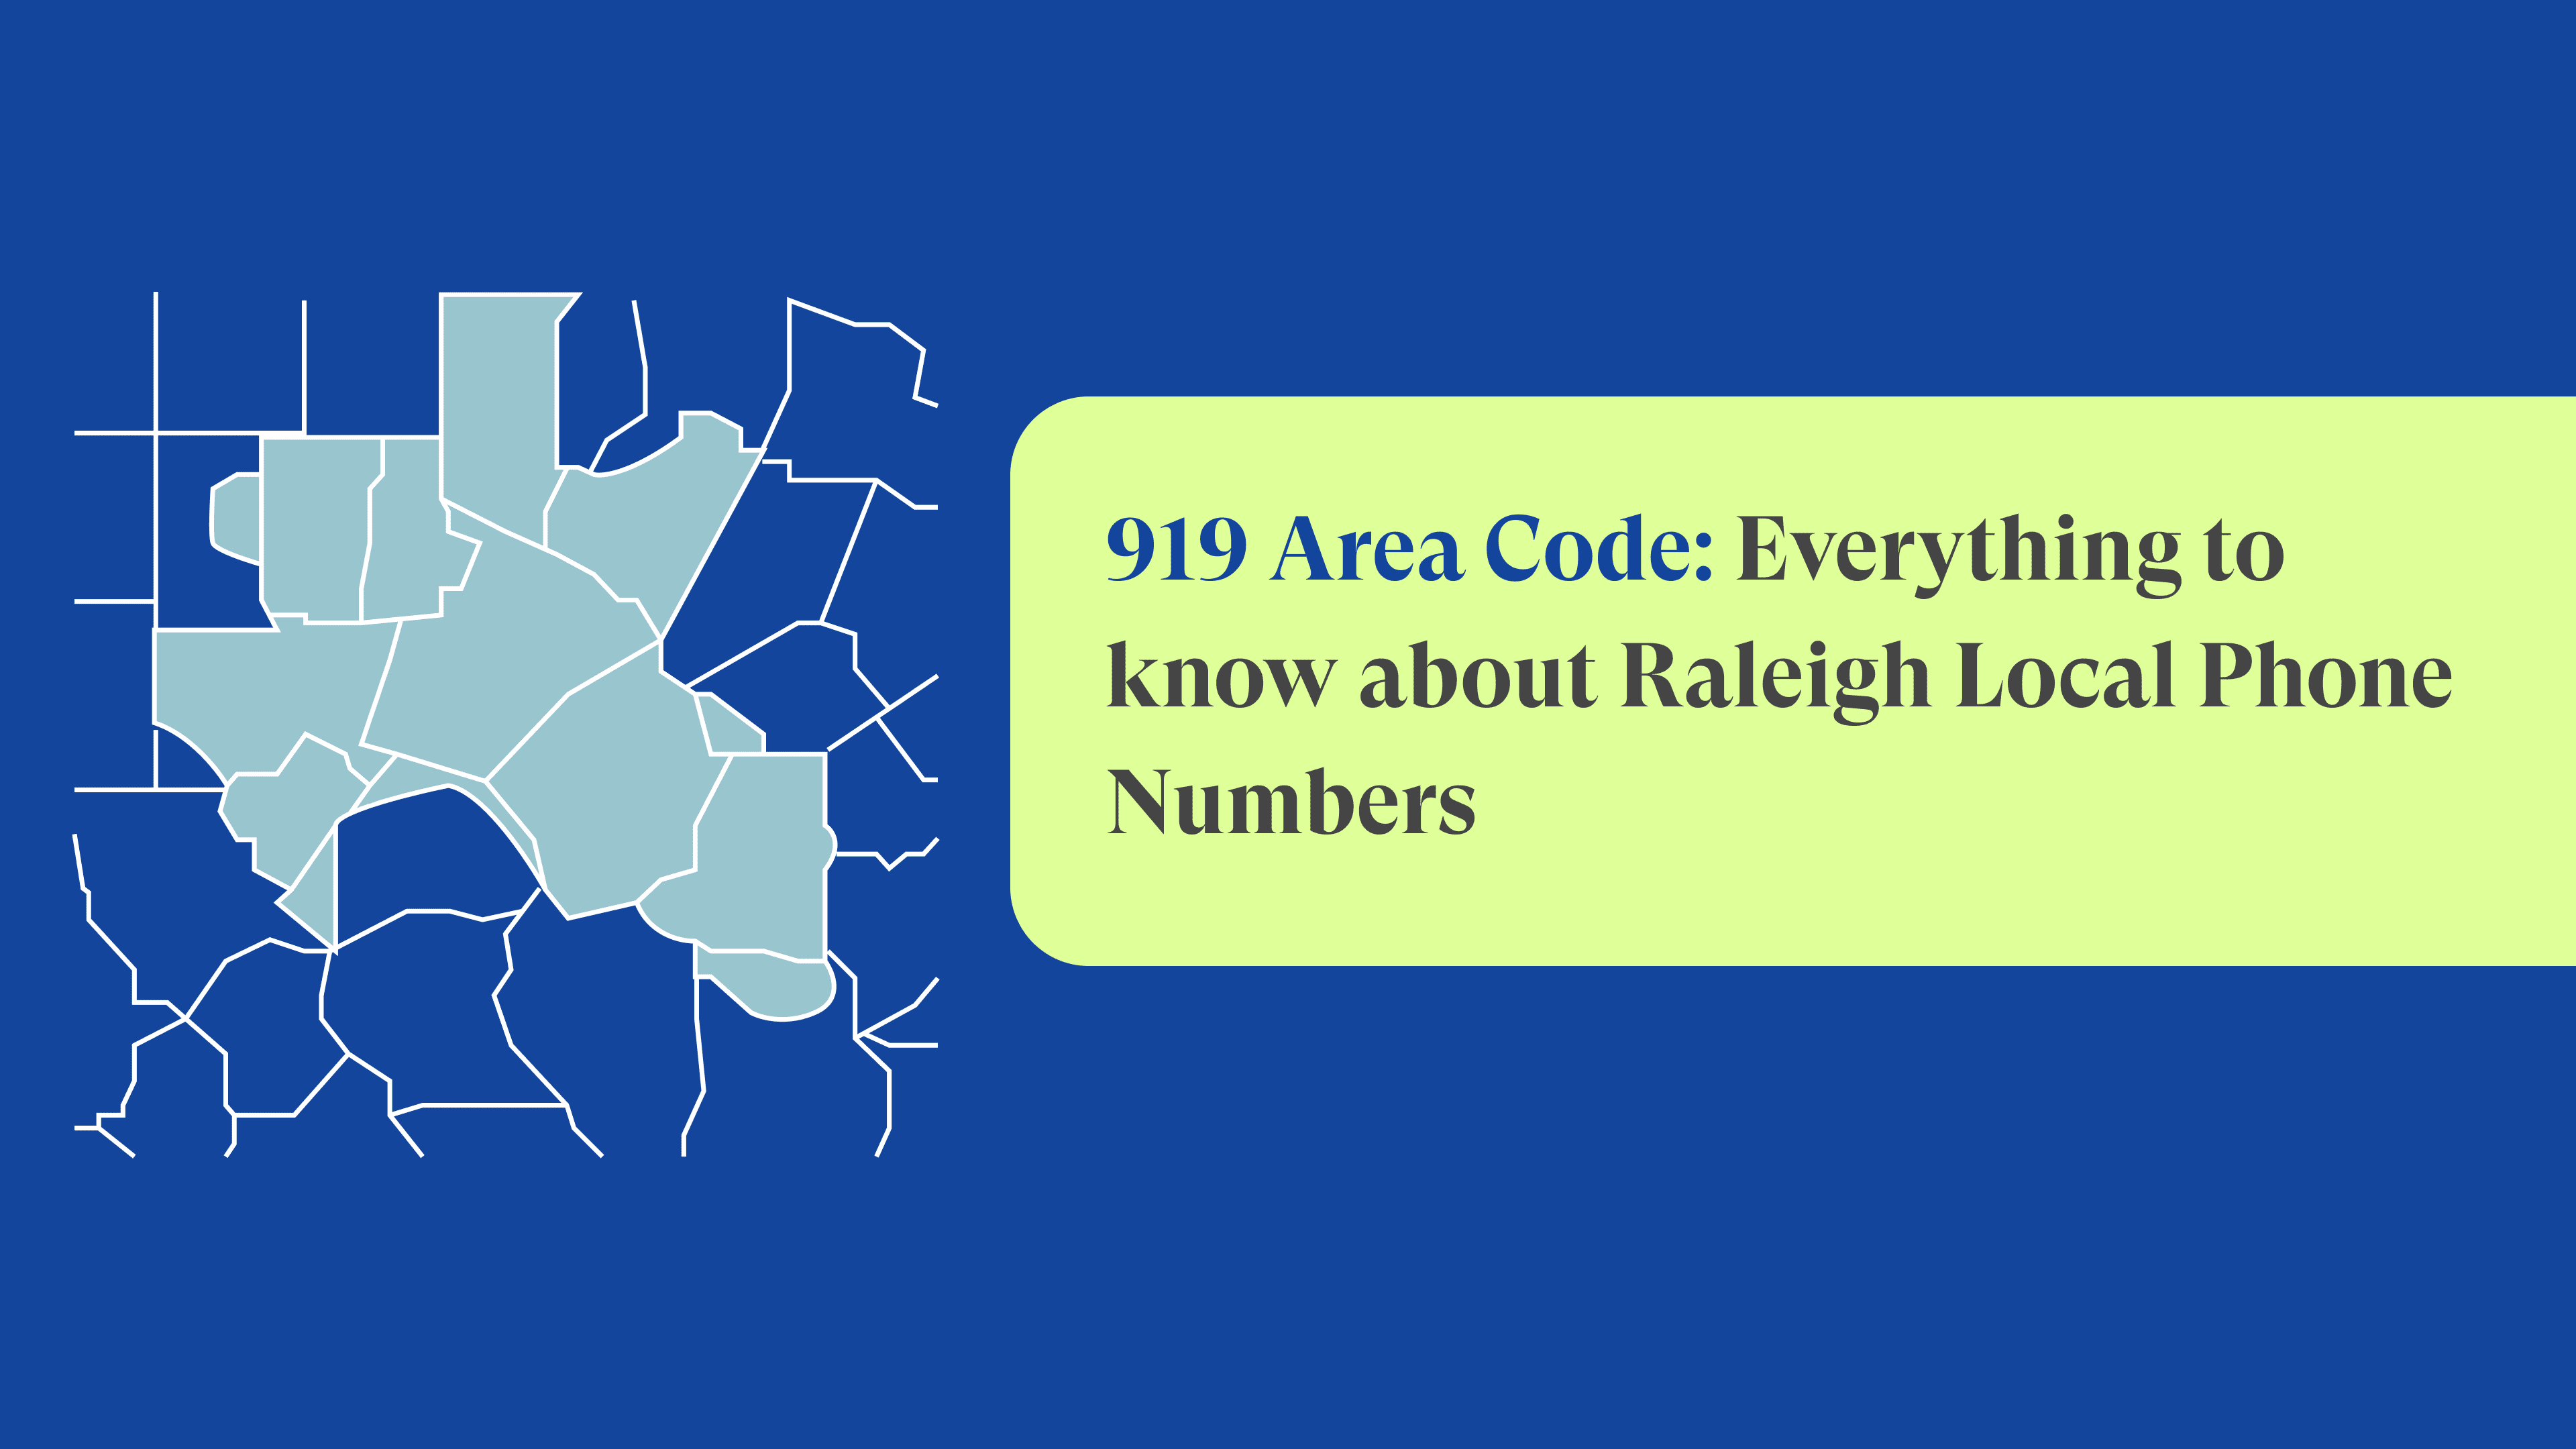 919 Area Code: All You Need to Know About Raleigh Local Phone Numbers